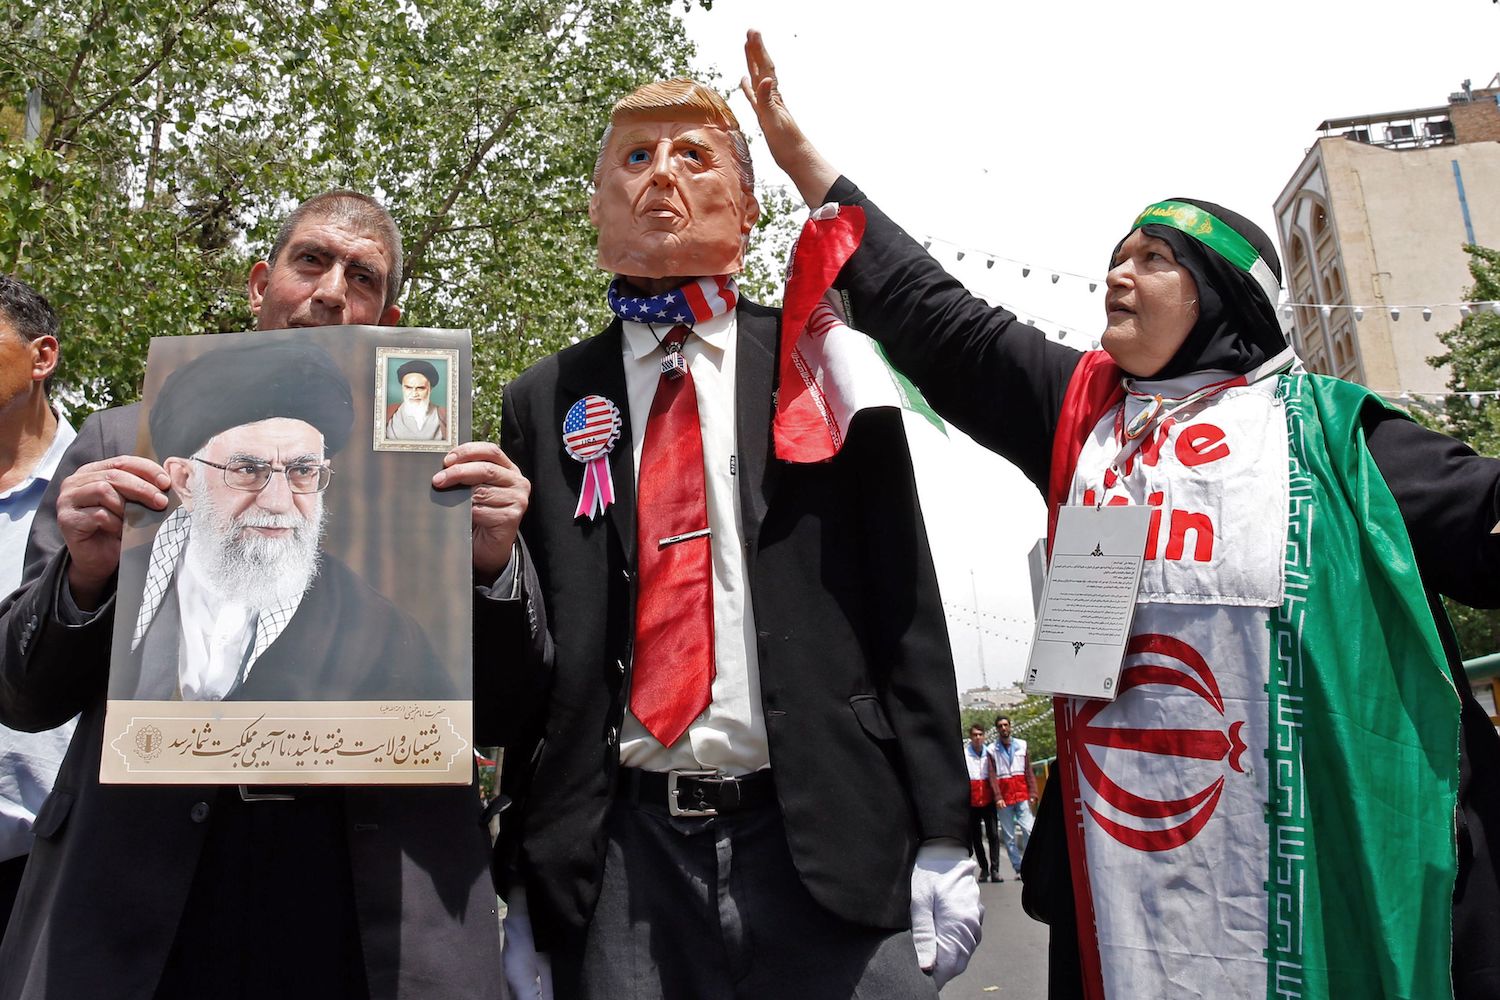 Iranian demonstrators carry a portrait of Iran's Supreme Leader Ayatollah Ali Khamenei and an effigy of US President Donald Trump during a rally in the capital Tehran, on May 10 2019. - Iranian foreign minister blamed the EU for the decline of Tehran's nuclear accord with world powers and insisted the bloc "should uphold" its obligations under the pact in which Iran agreed to curb its nuclear ambitions in return for sanctions relief.
US President Donald Trump pulled the United States out of the agreement in May of last year and reinstated unilateral economic sanctions. (Photo by STR / AFP)        (Photo credit should read STR/AFP/Getty Images)